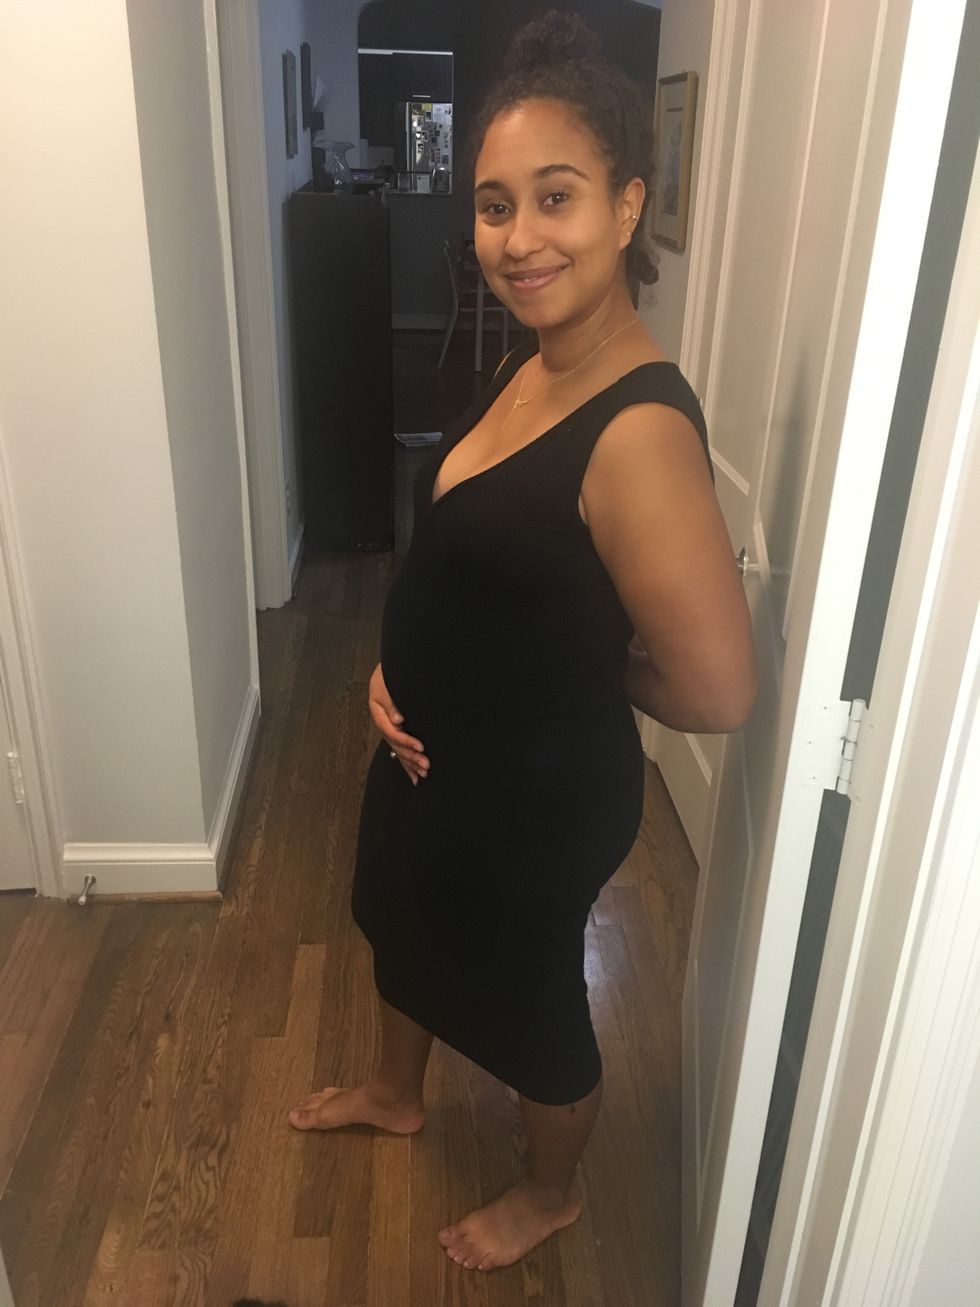 naima coster stands sideways, her pregnancy visible